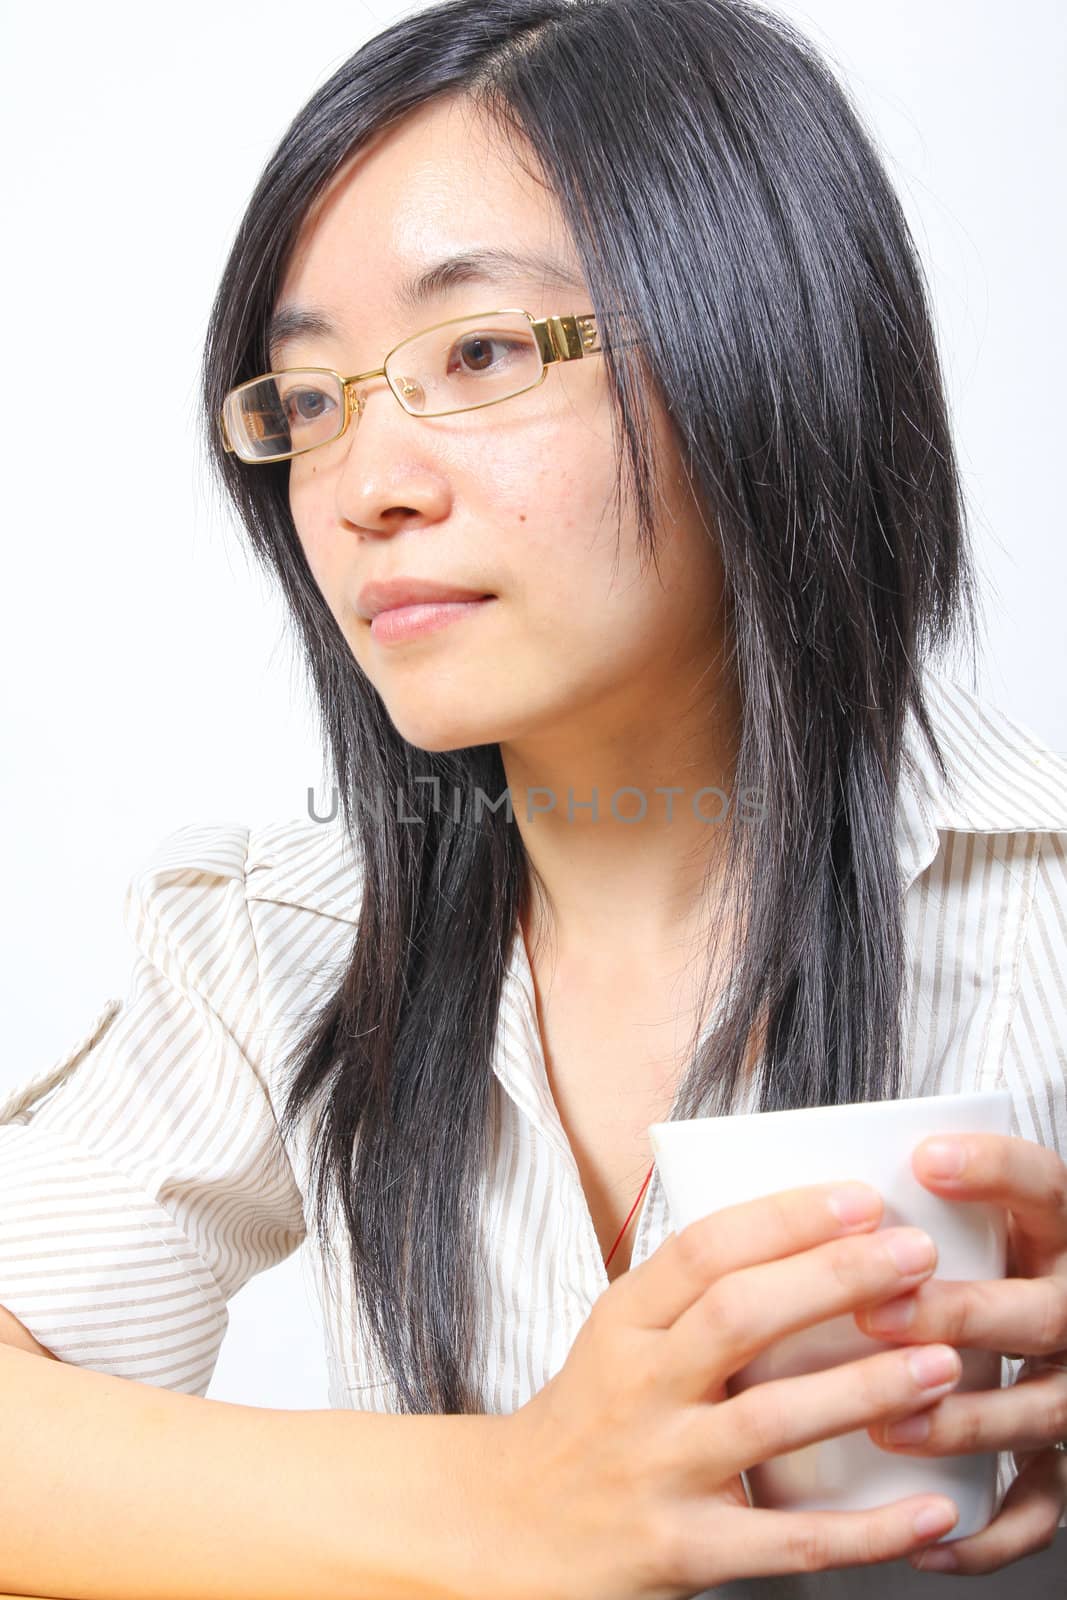 Chinese businesswoman drinking coffee by dotweb